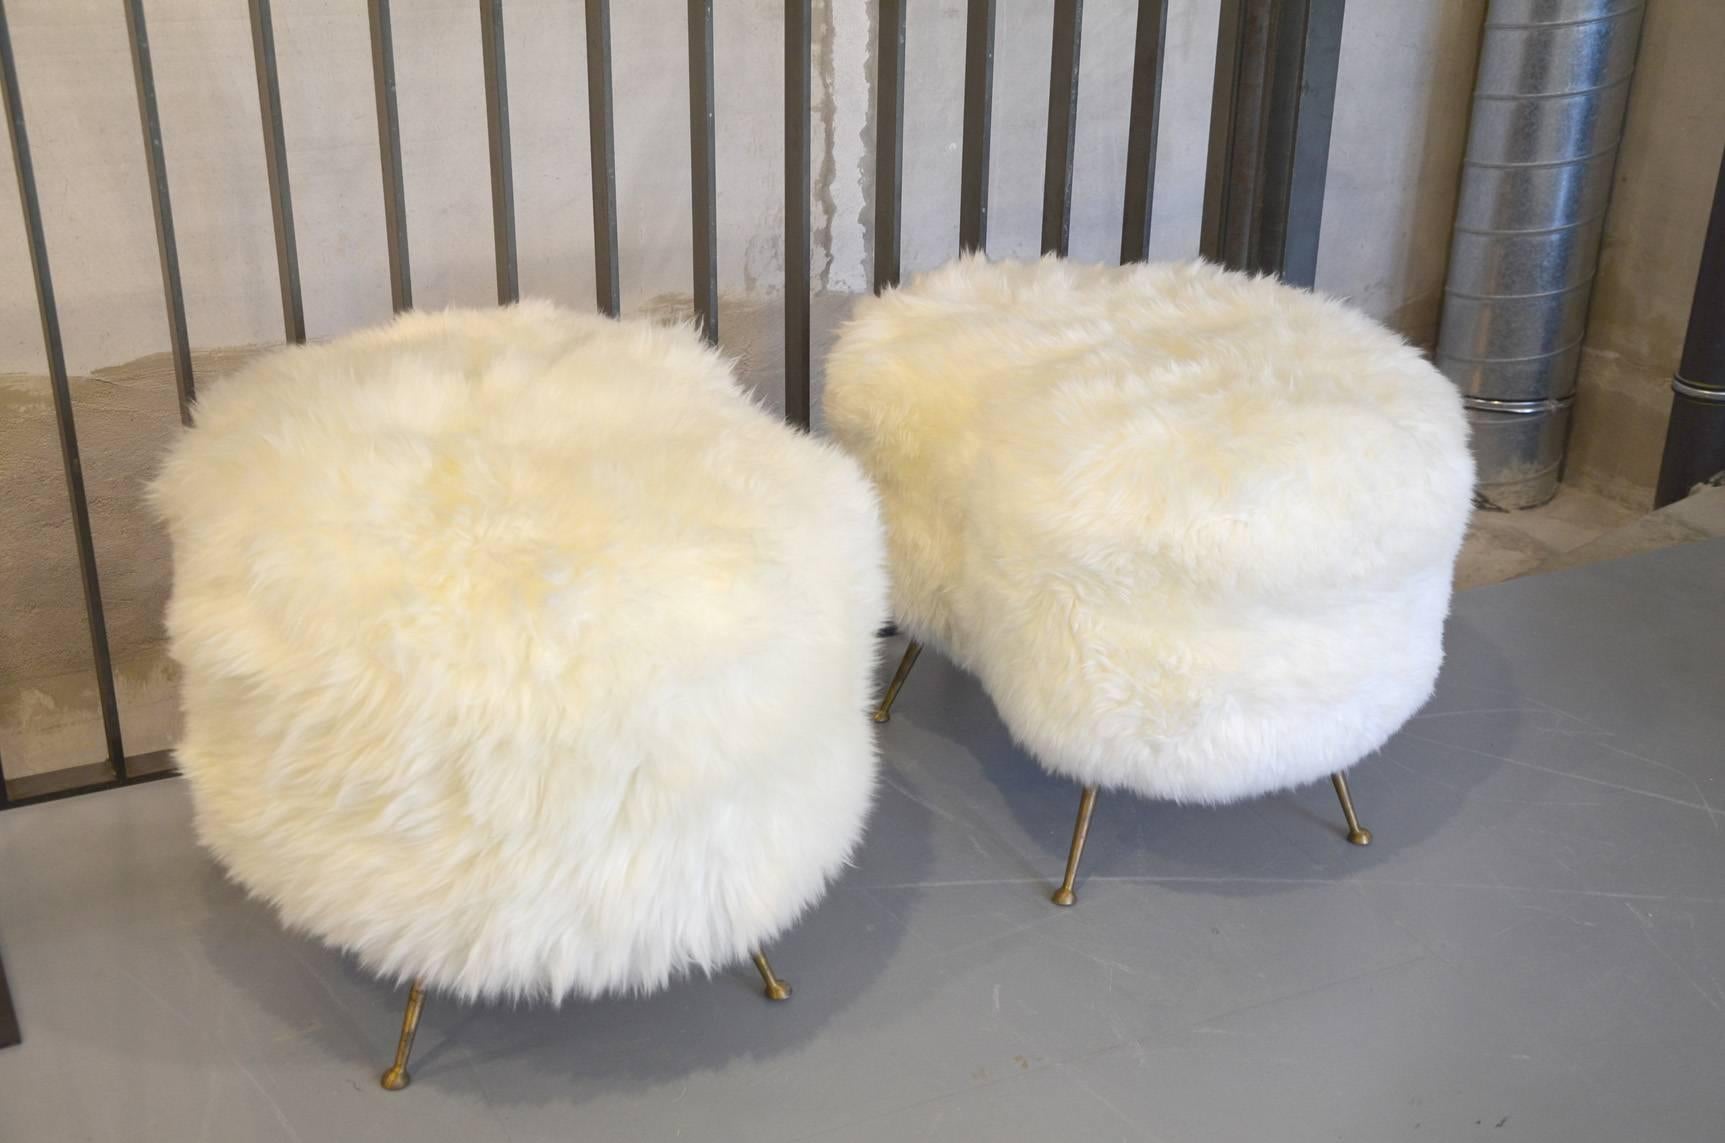 Beautiful Pair of benches, white wool and brass feet. Contemporary edition made in Italy and designed by L'Atelier 55
